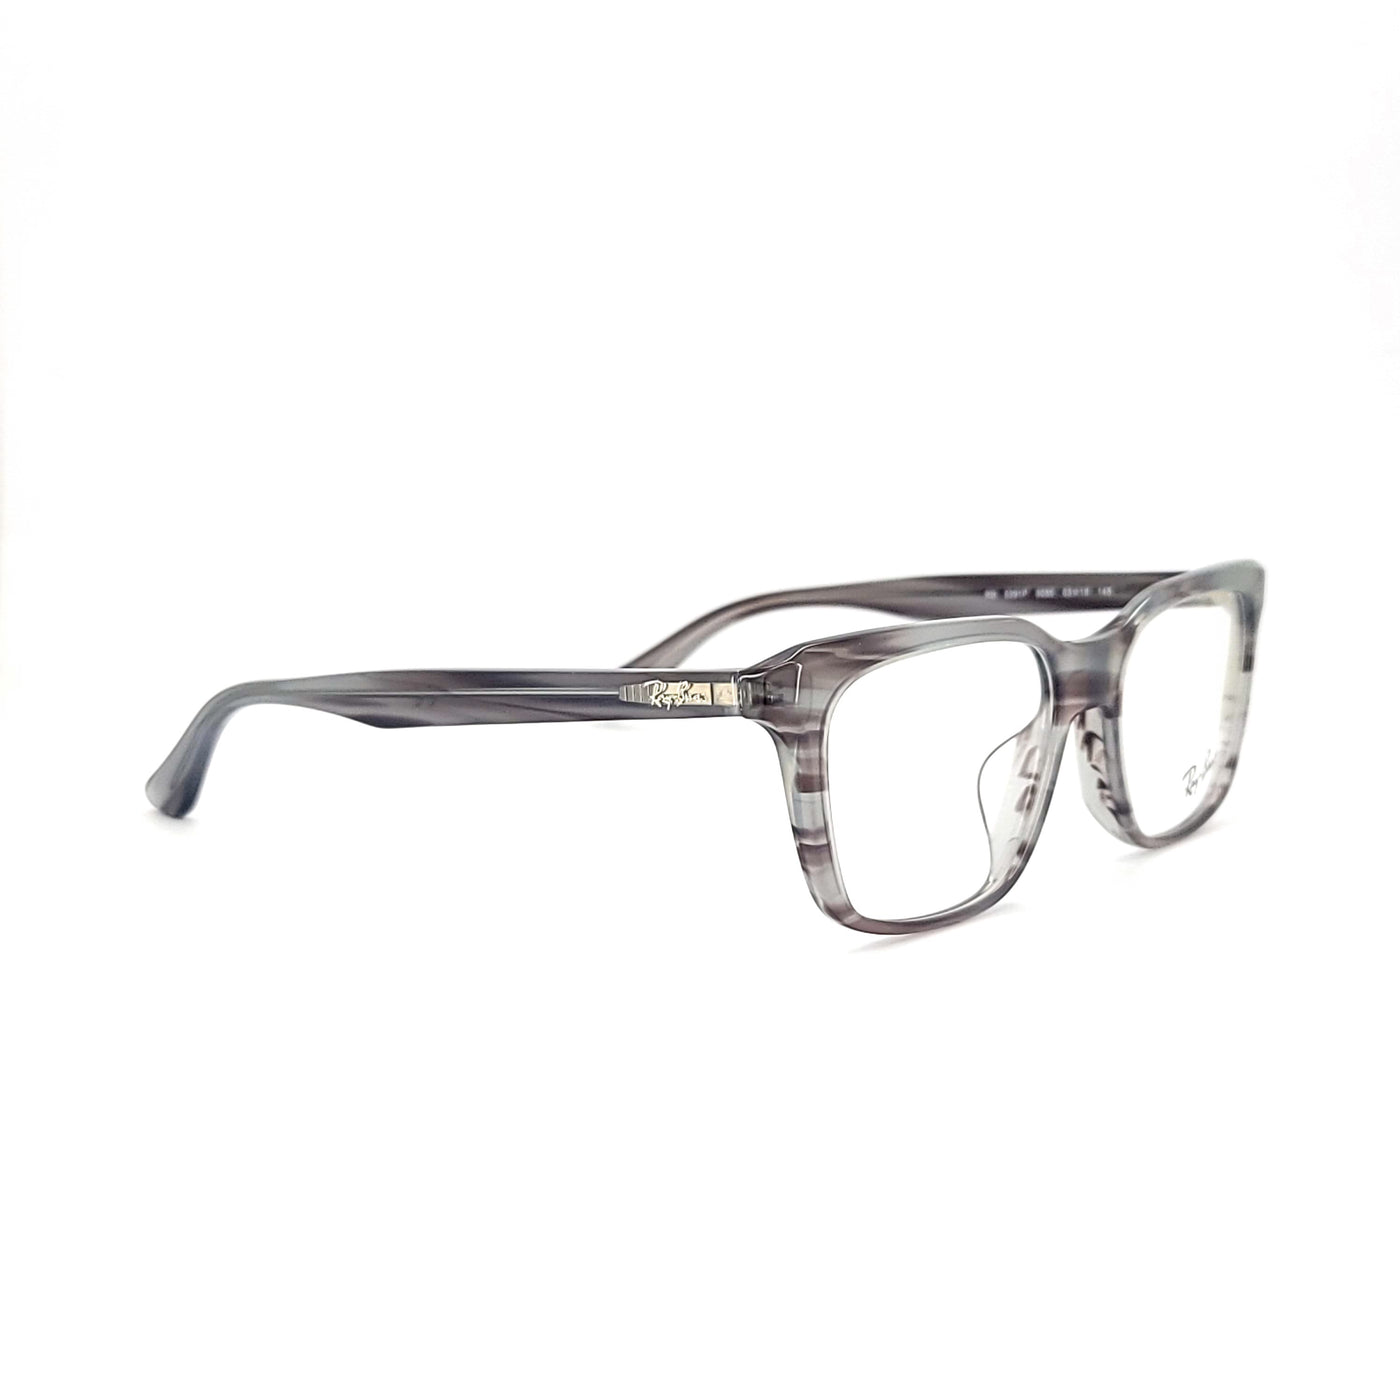 Ray-Ban Highstreet RB5391F/8055_53 | Eyeglasses - Vision Express Optical Philippines